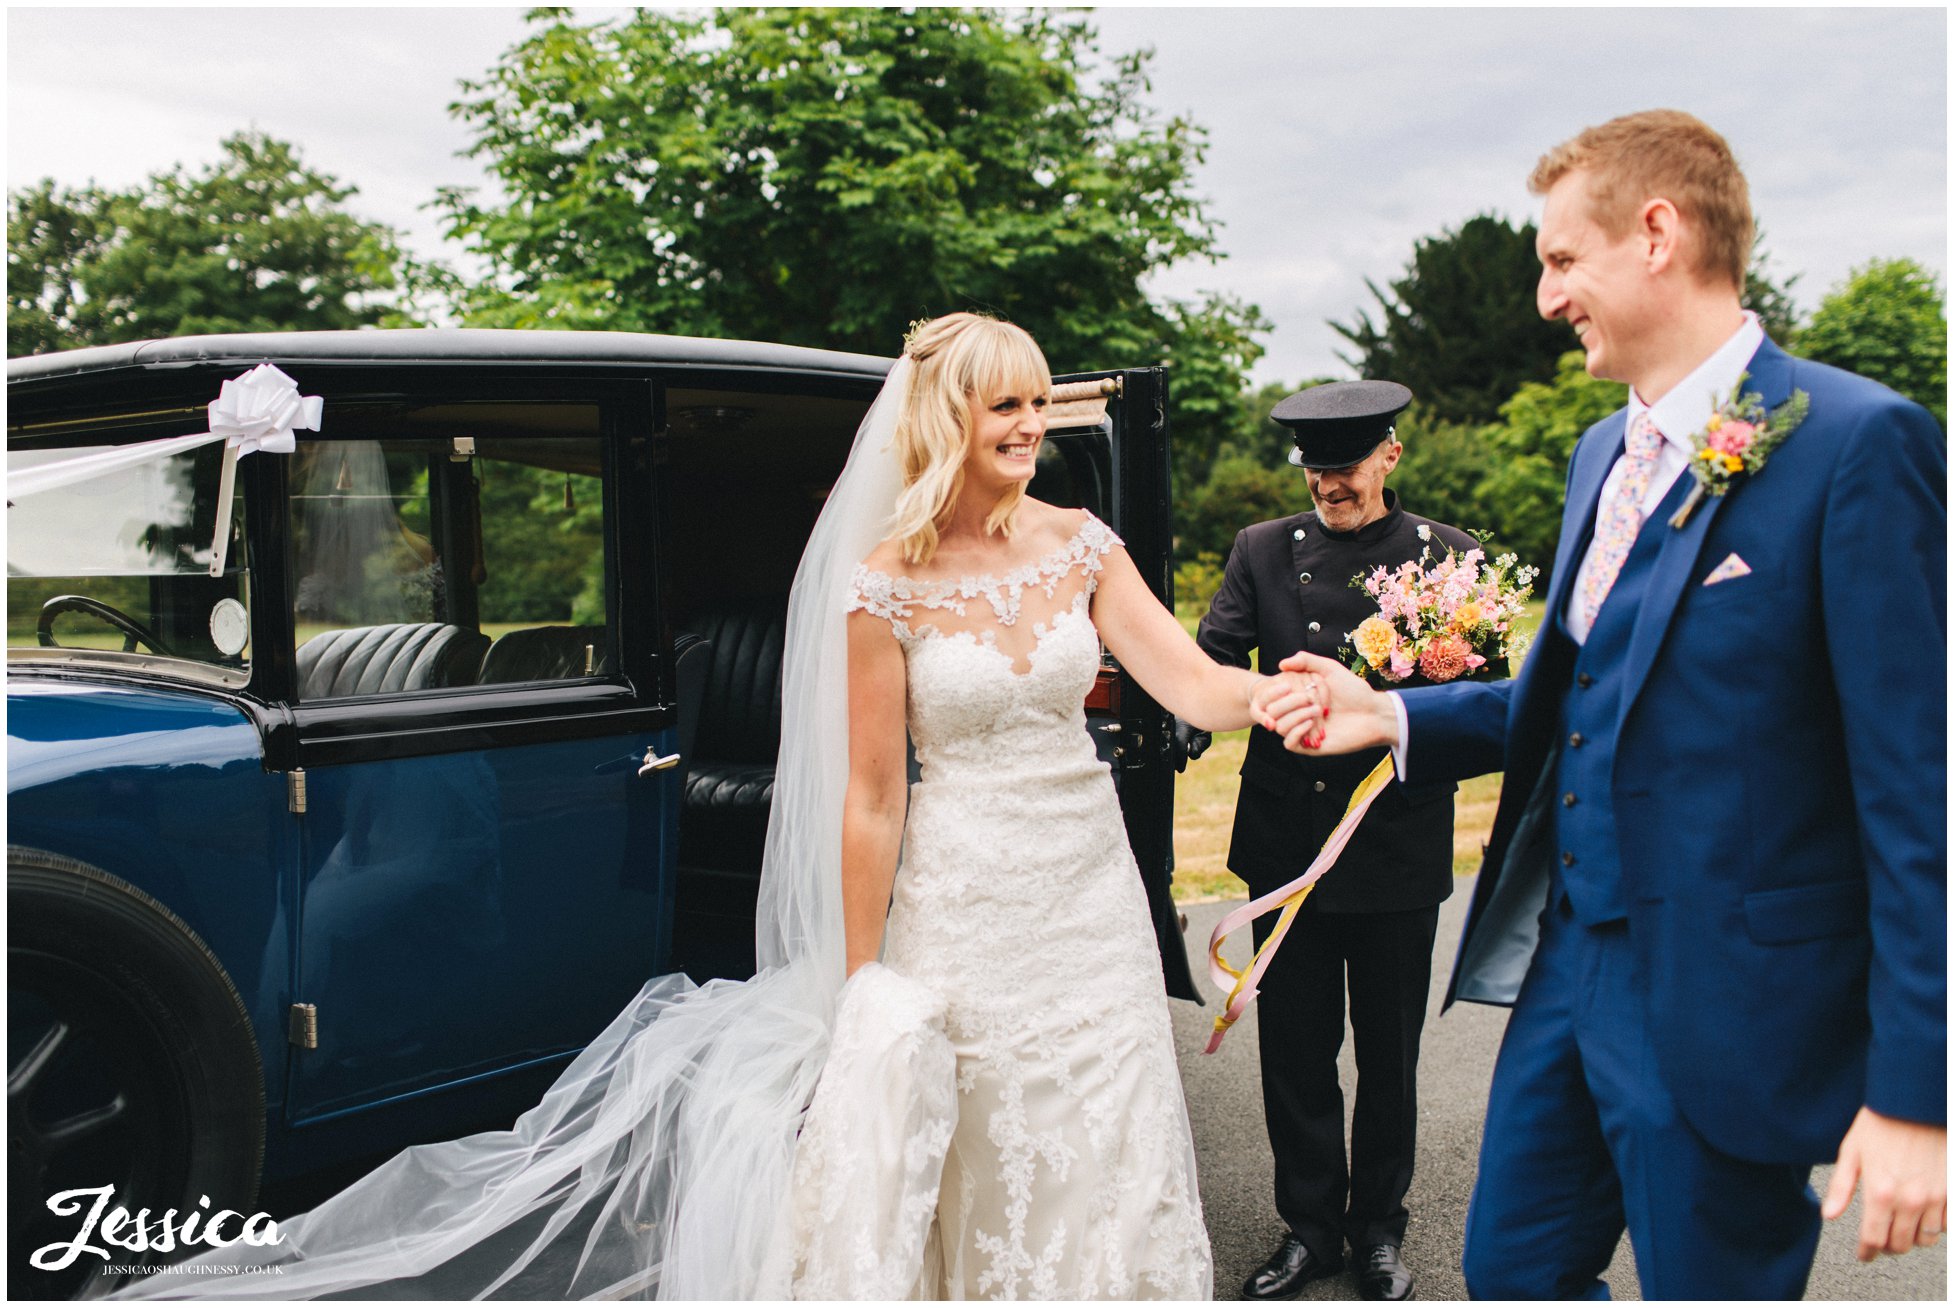 the groom helps his bride out of the wedding car